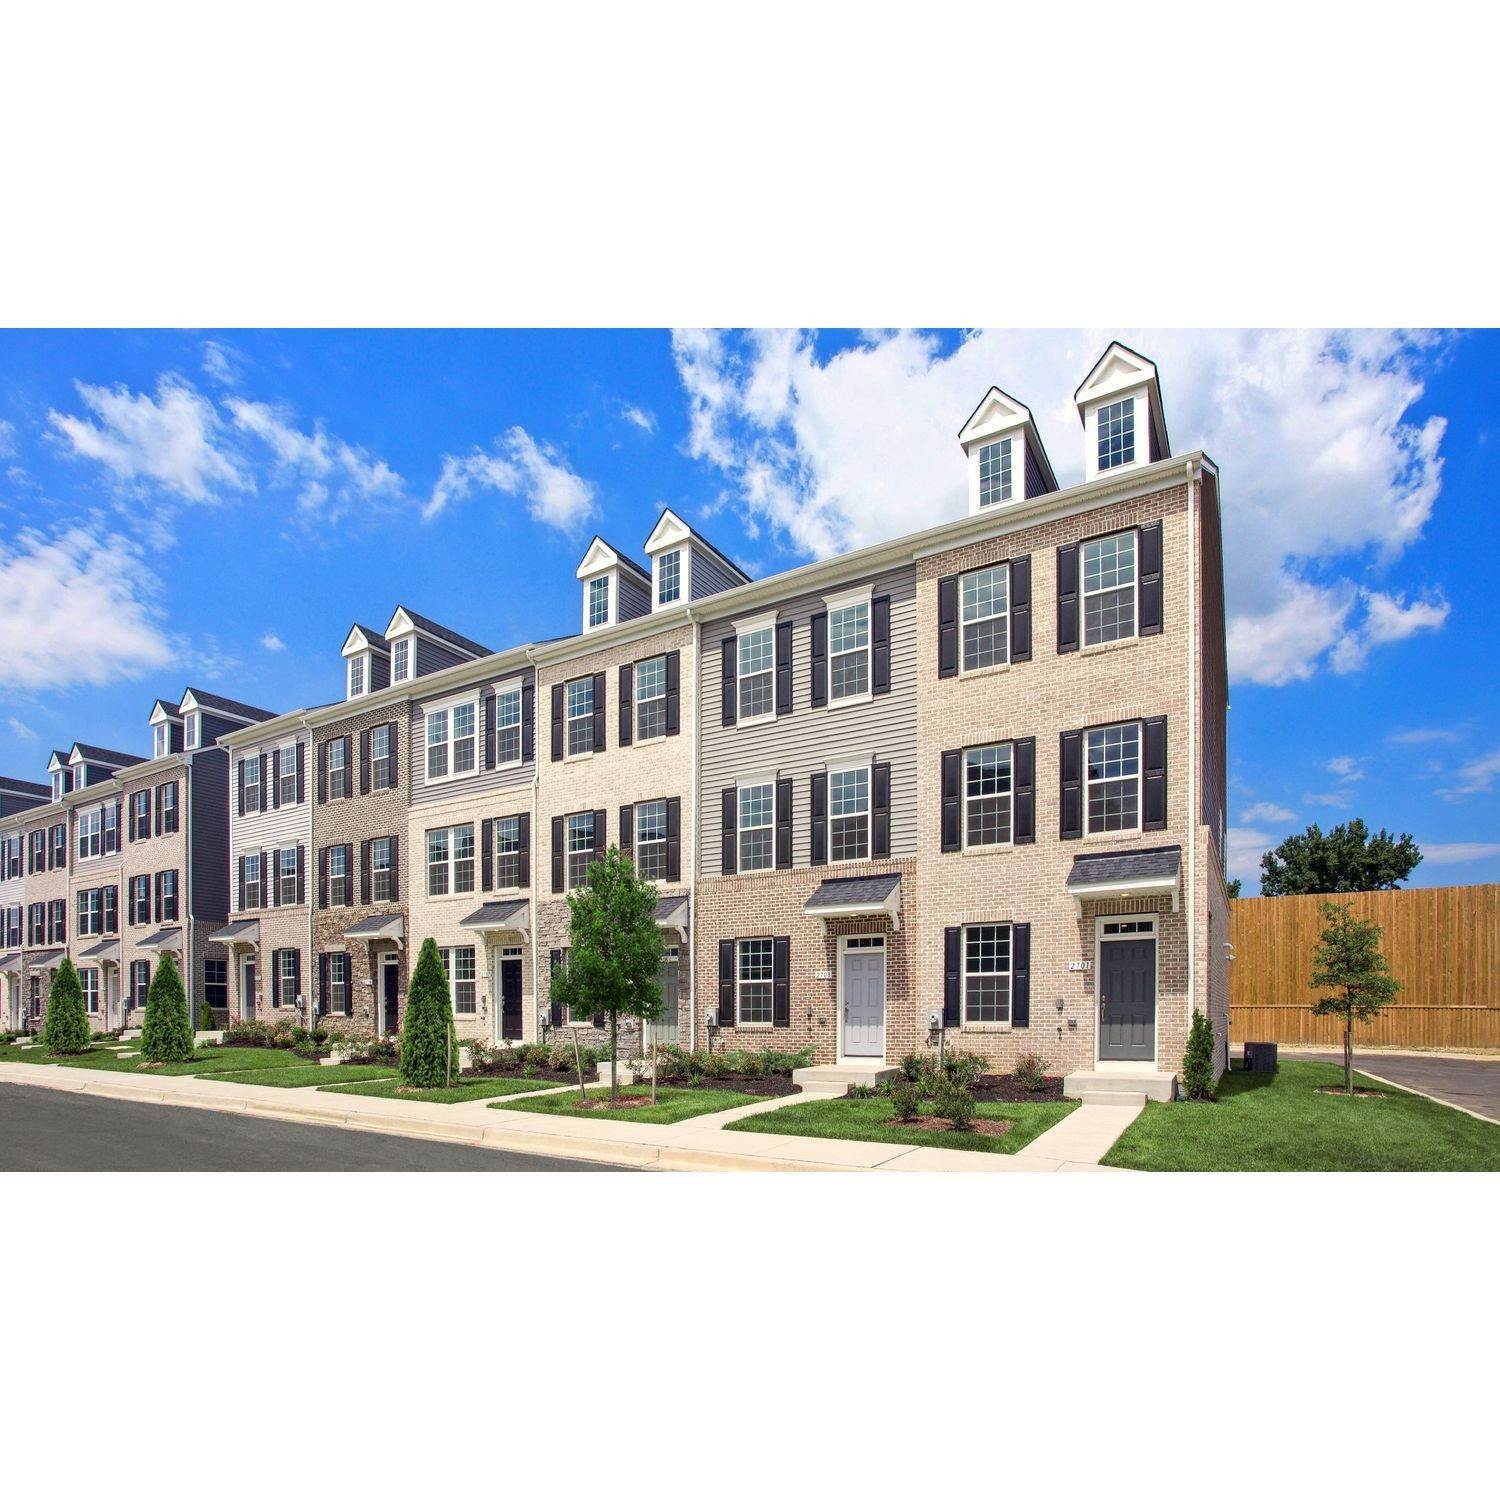 Townhouse for Sale at Upper Marlboro, MD 20774